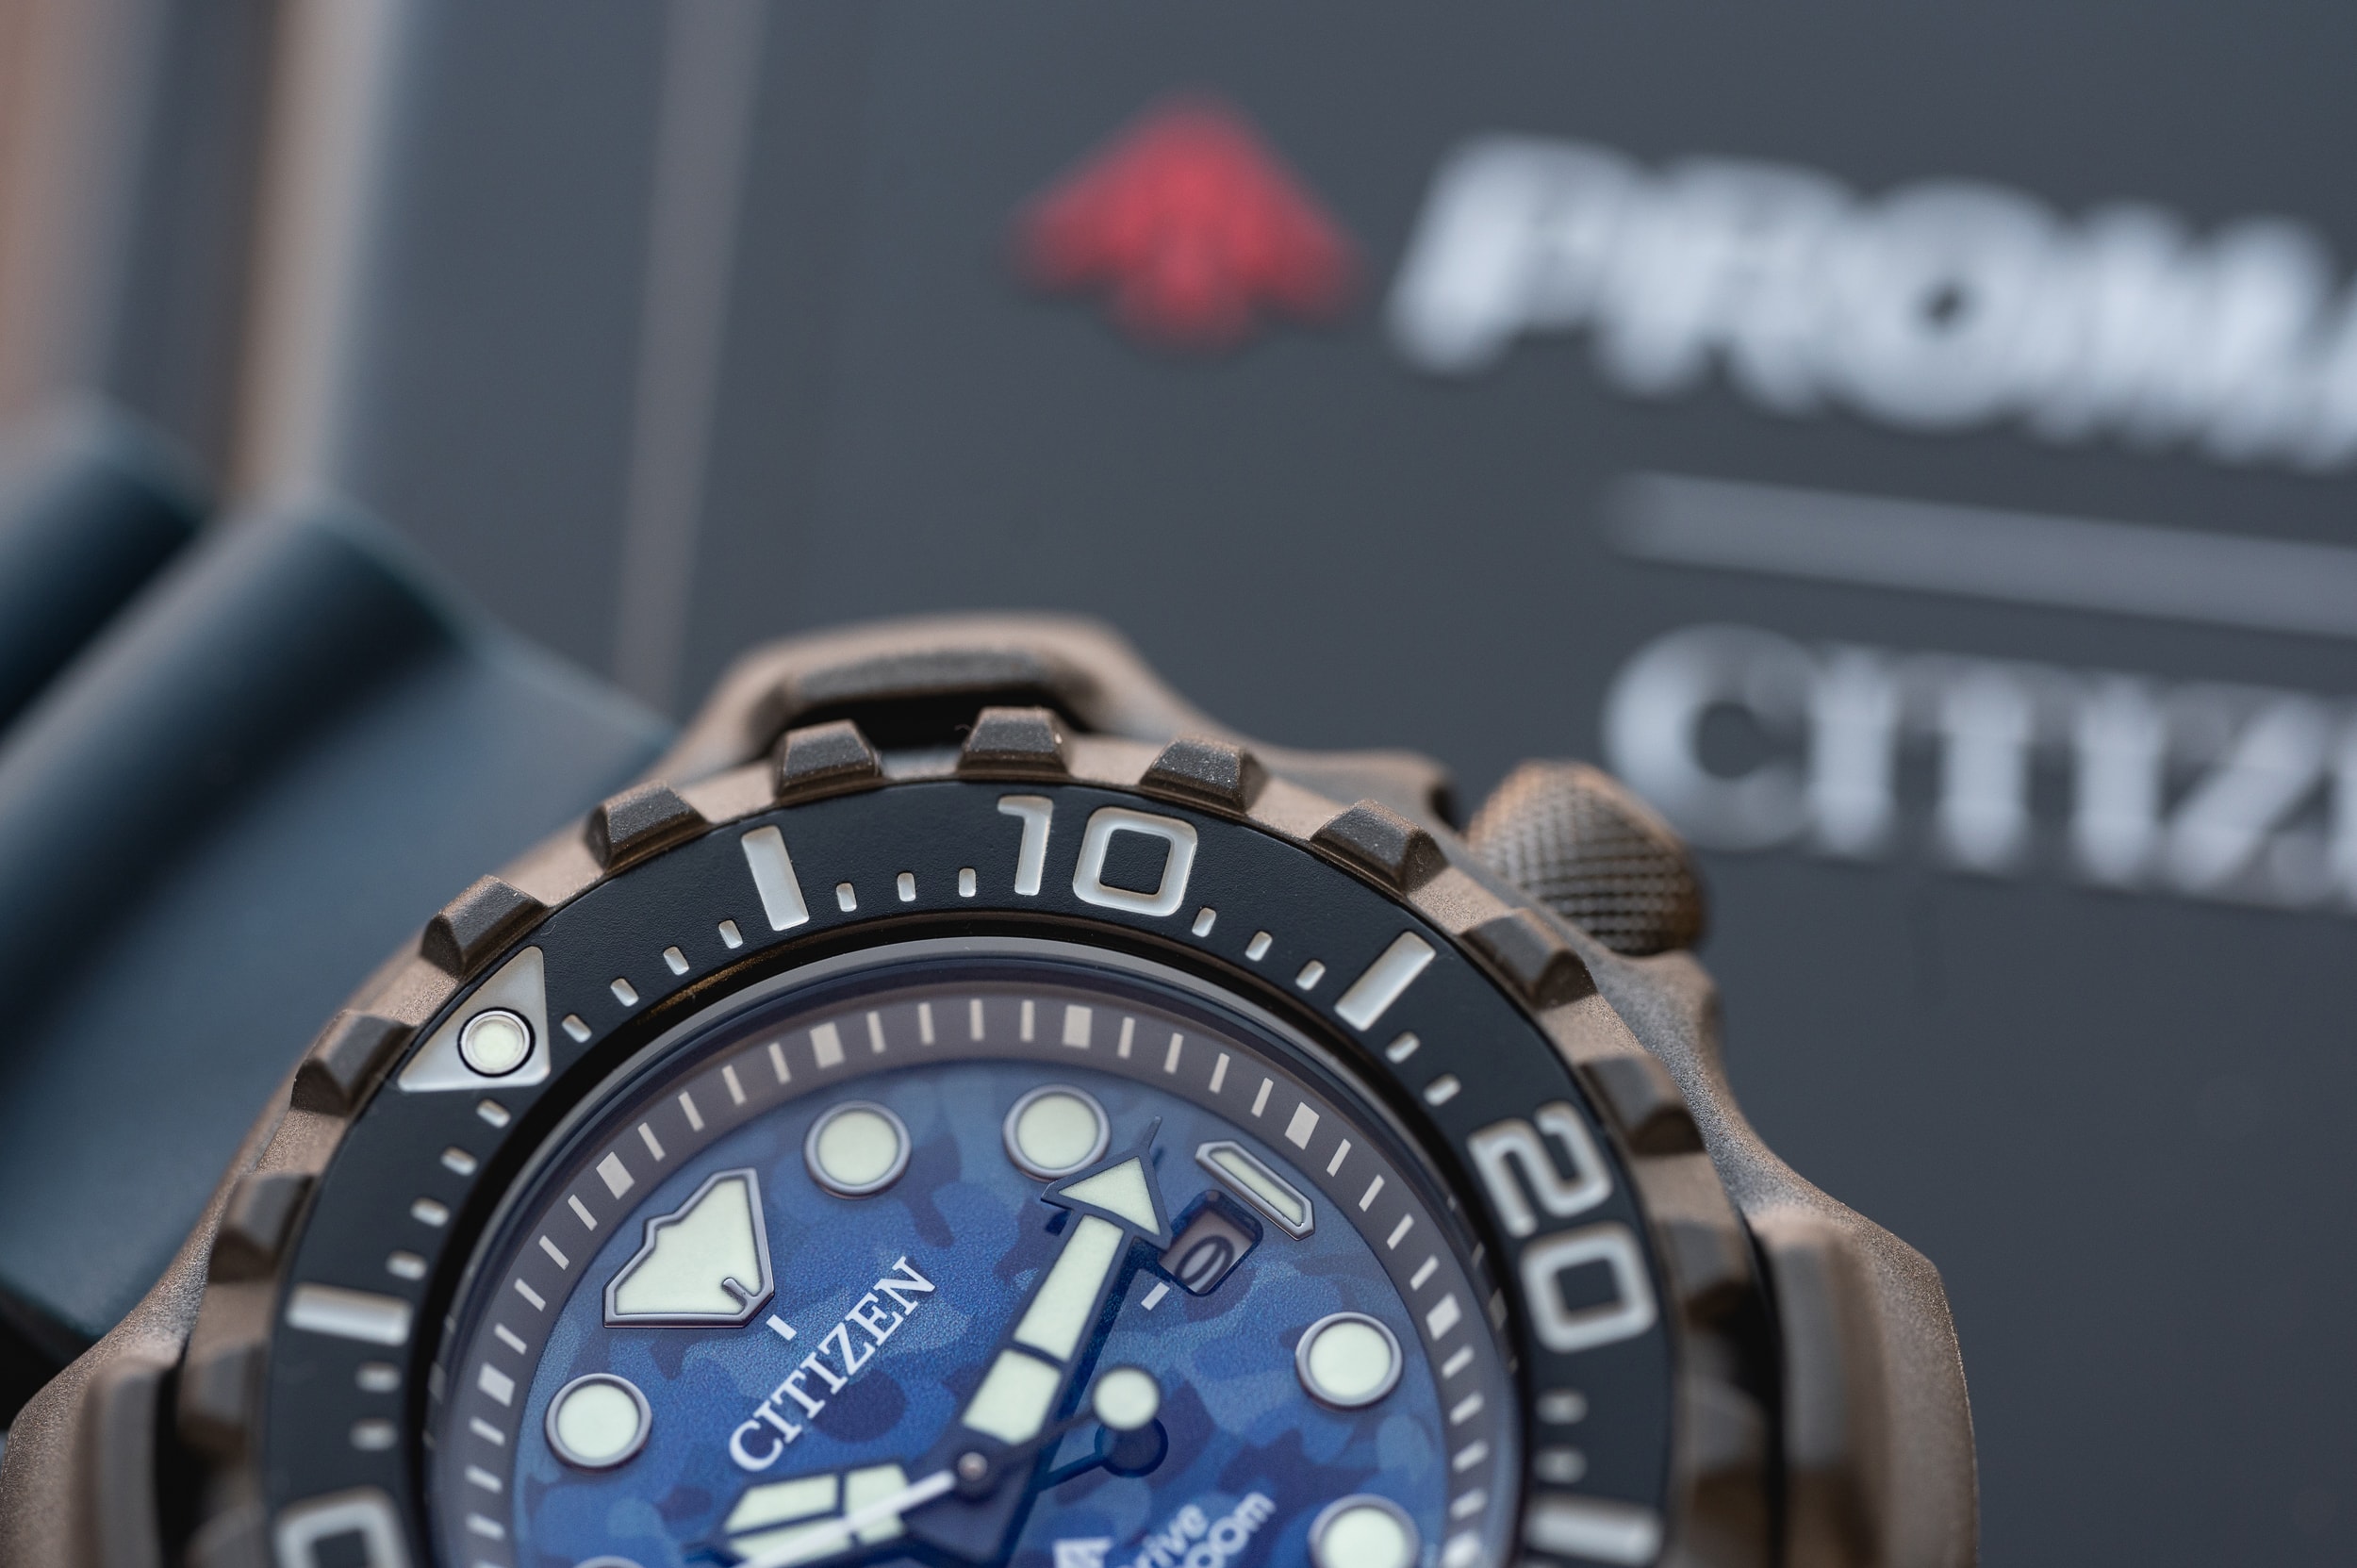 Review: The Approachable Worn BN0227-09L Citizen - Promaster Assertive & Diver Yet Wound